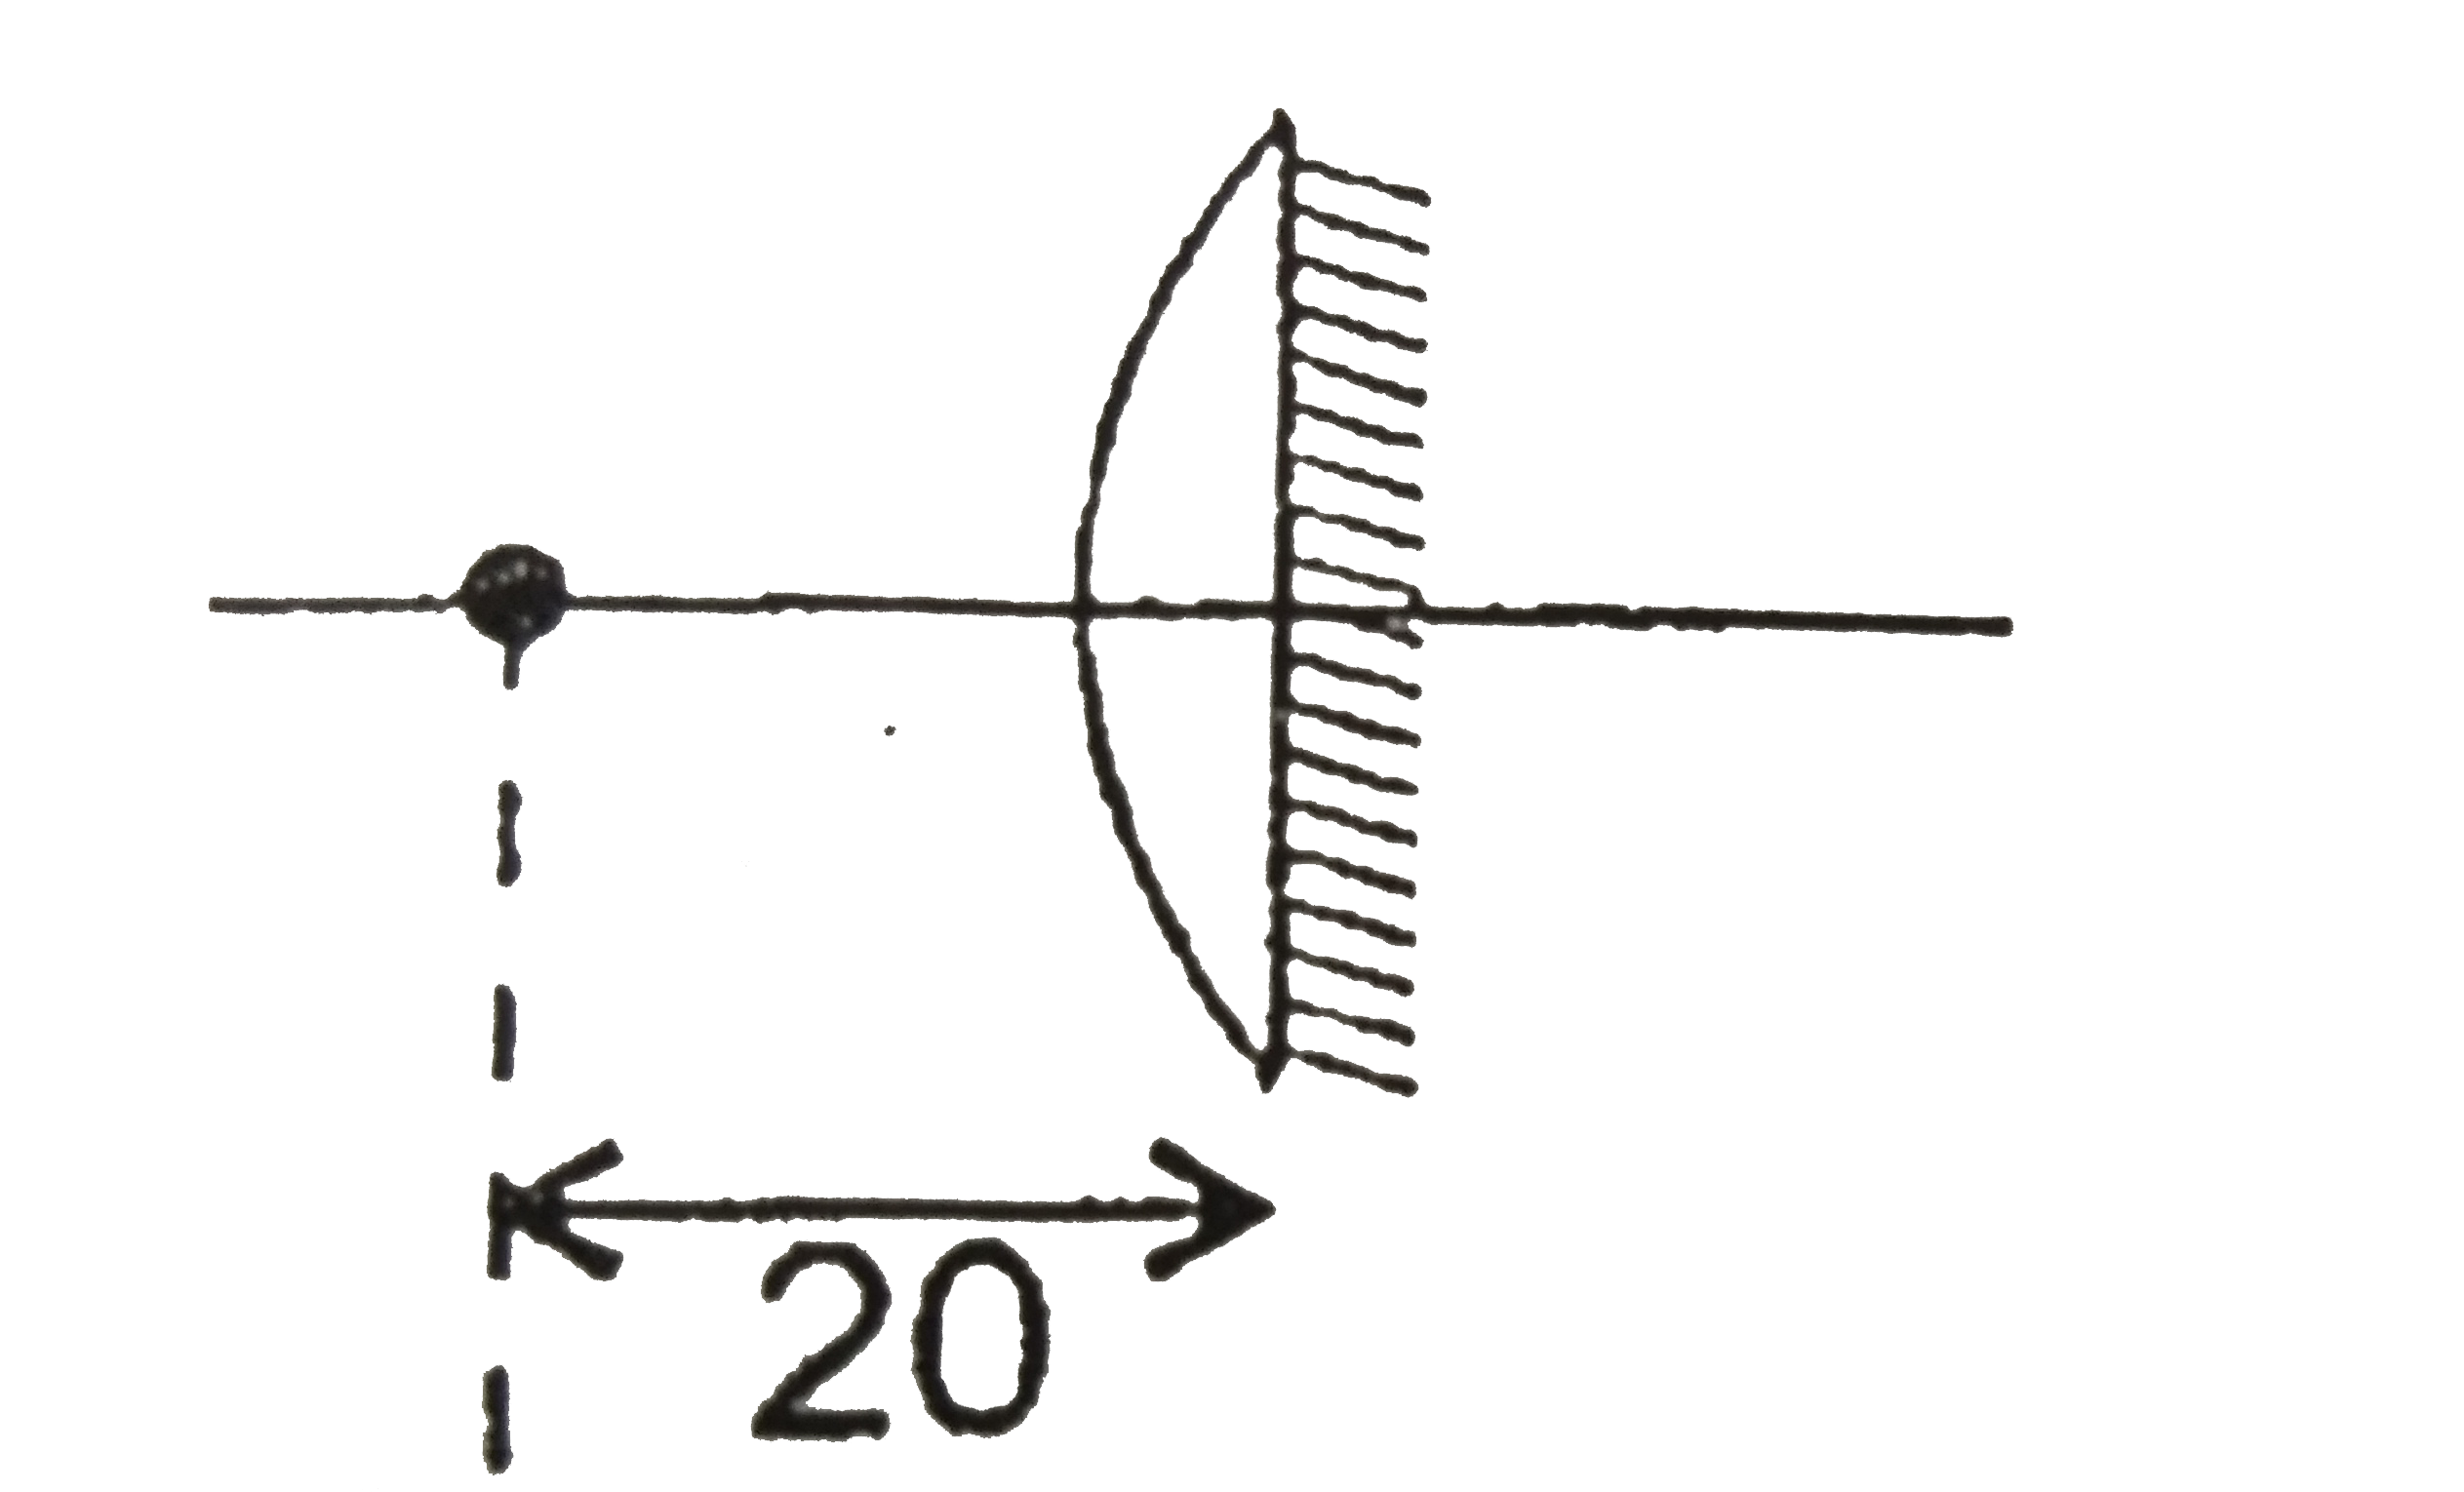 A point object is placed at a distance of 20 cm from a thin plano-concex lens of focal length 15 cm. The plane surface of the lens is now silvered. The image created by the is at :